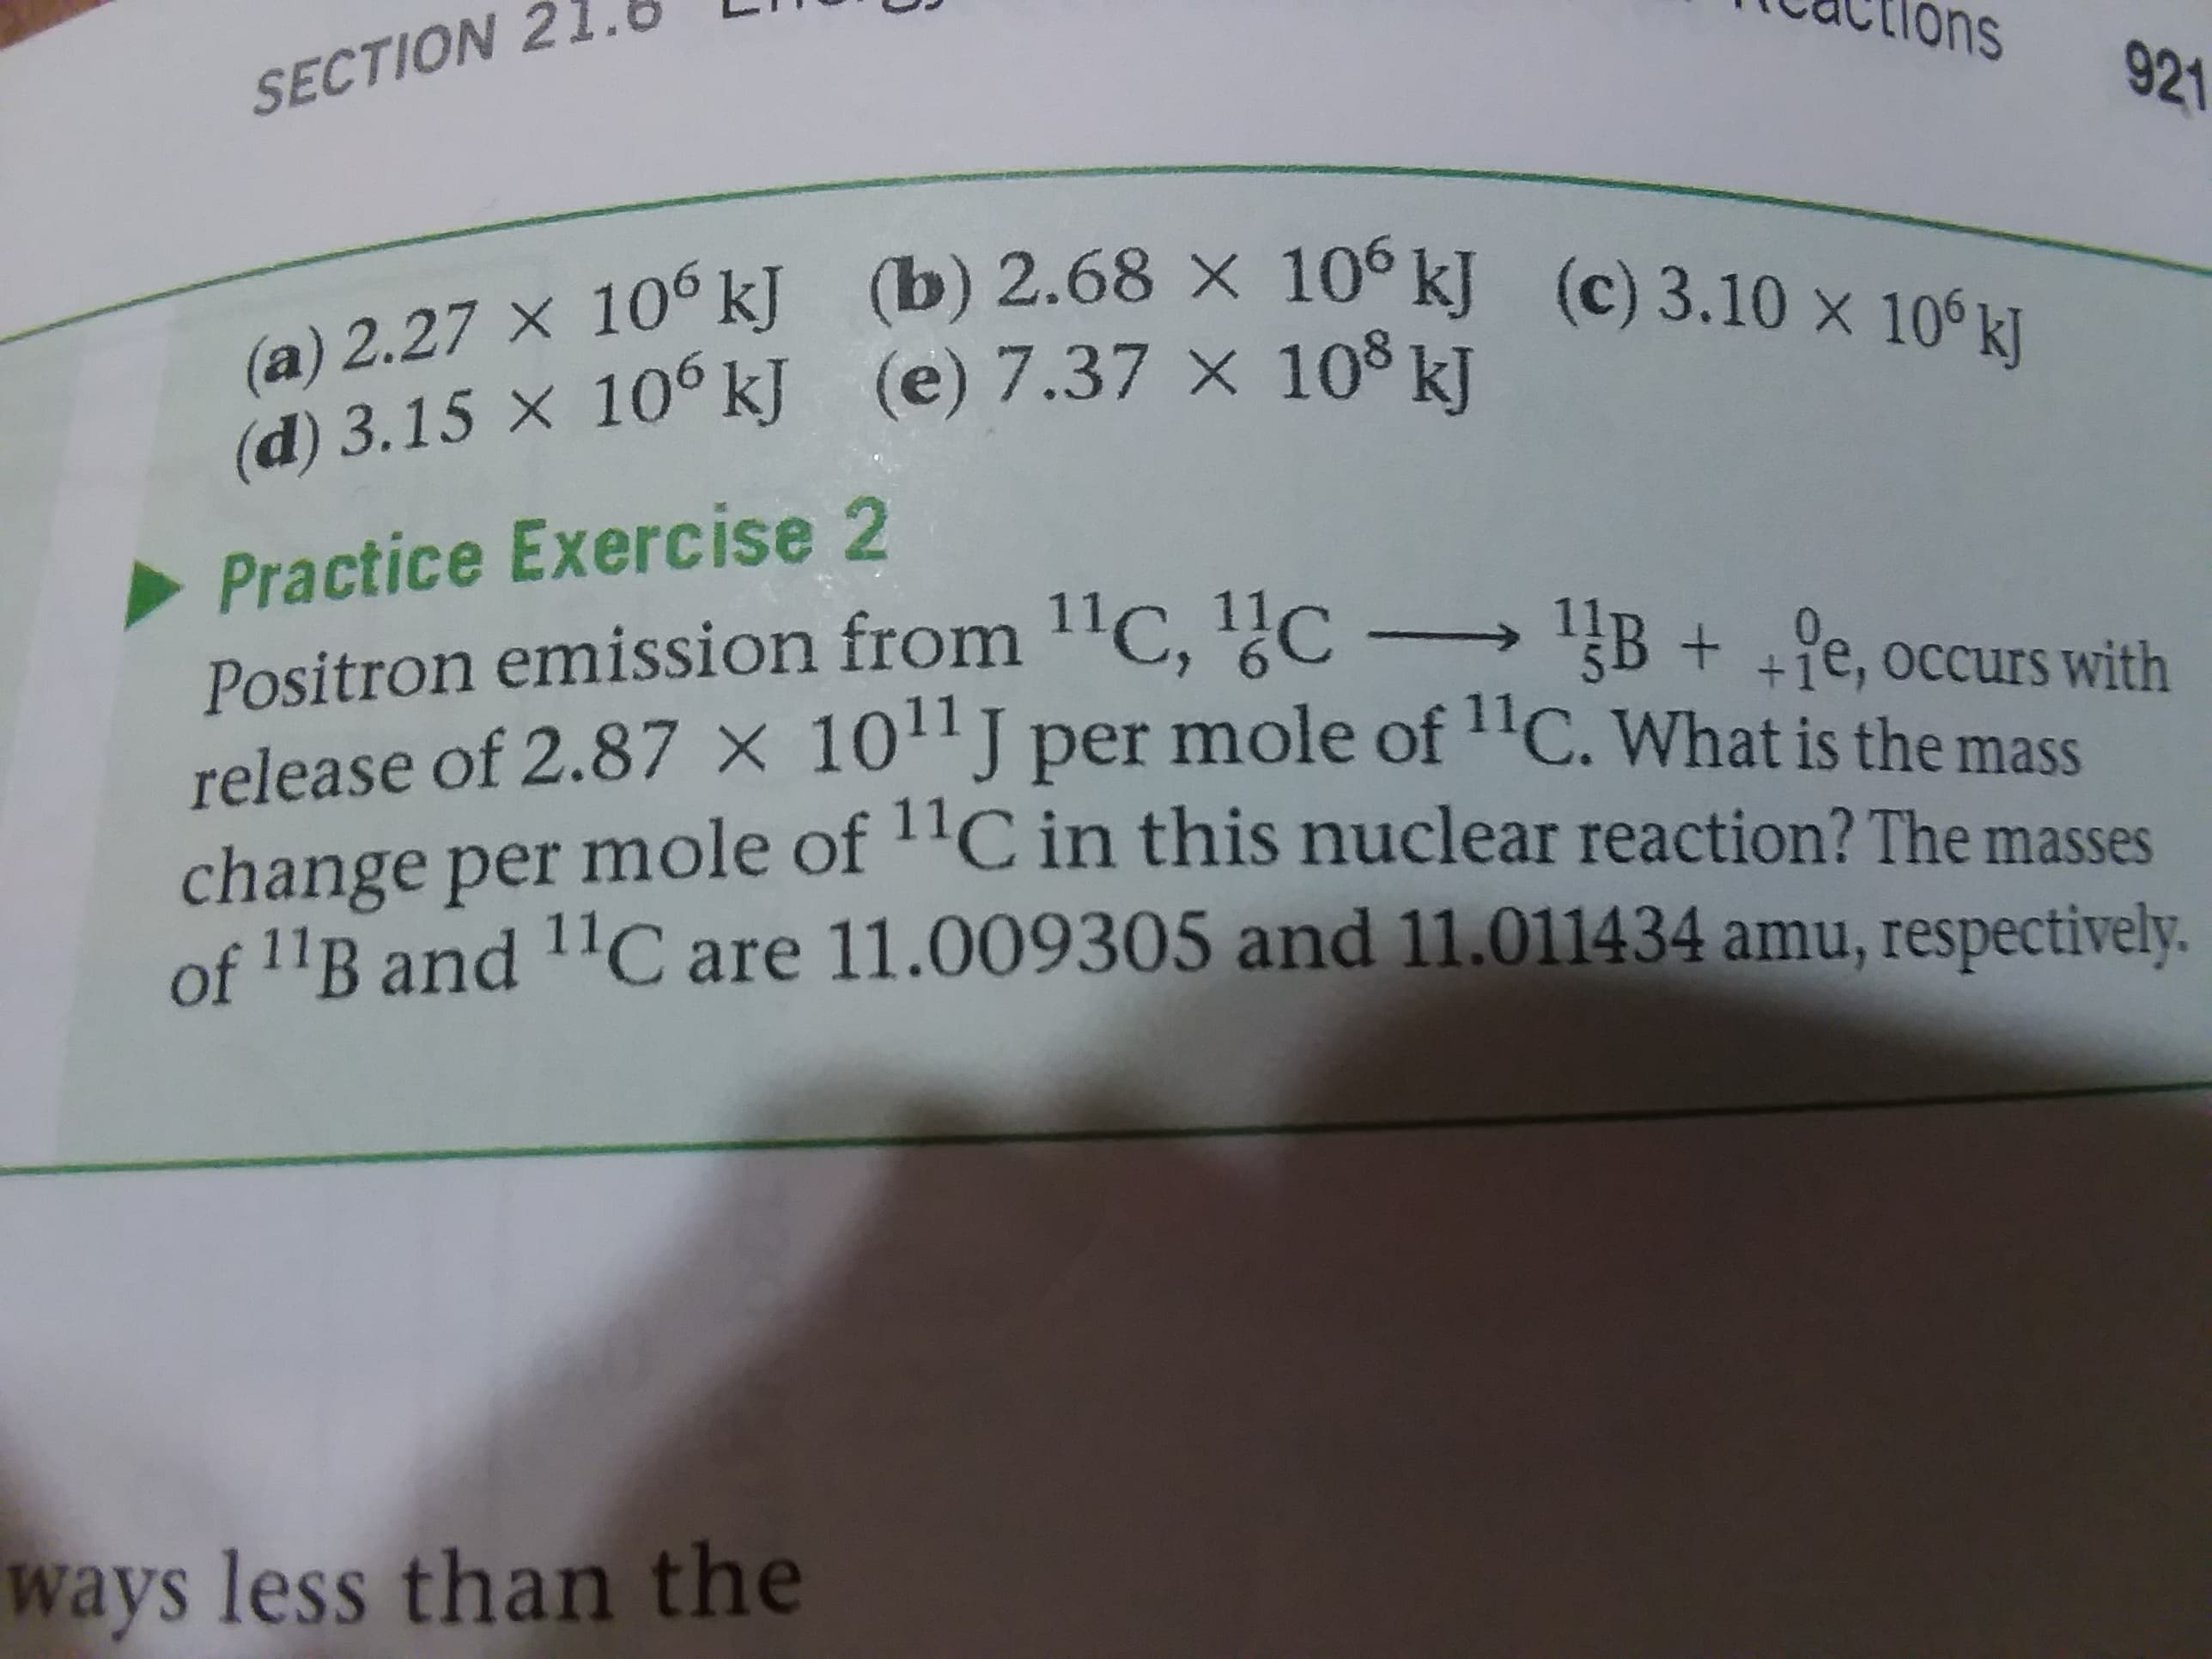 ons
921
SECTION
(a) 2.27 x 10° kJ (b) 2.68 × 10° kJ (c) 3.10 × 10° kJ
(d) 3.15 X 10° kJ (e) 7.37 x 10° kJ
Practice Exercise 2
Positron emission from 1'C, 1c
release of 2.87 × 10'J per mole of "C. What is the mass
change per mole of ''C in this nuclear reaction? The masses
of 11B and 11C are 11.009305 and 11.011434 amu, respectively.
B + +e, occurs with
ways less than the
